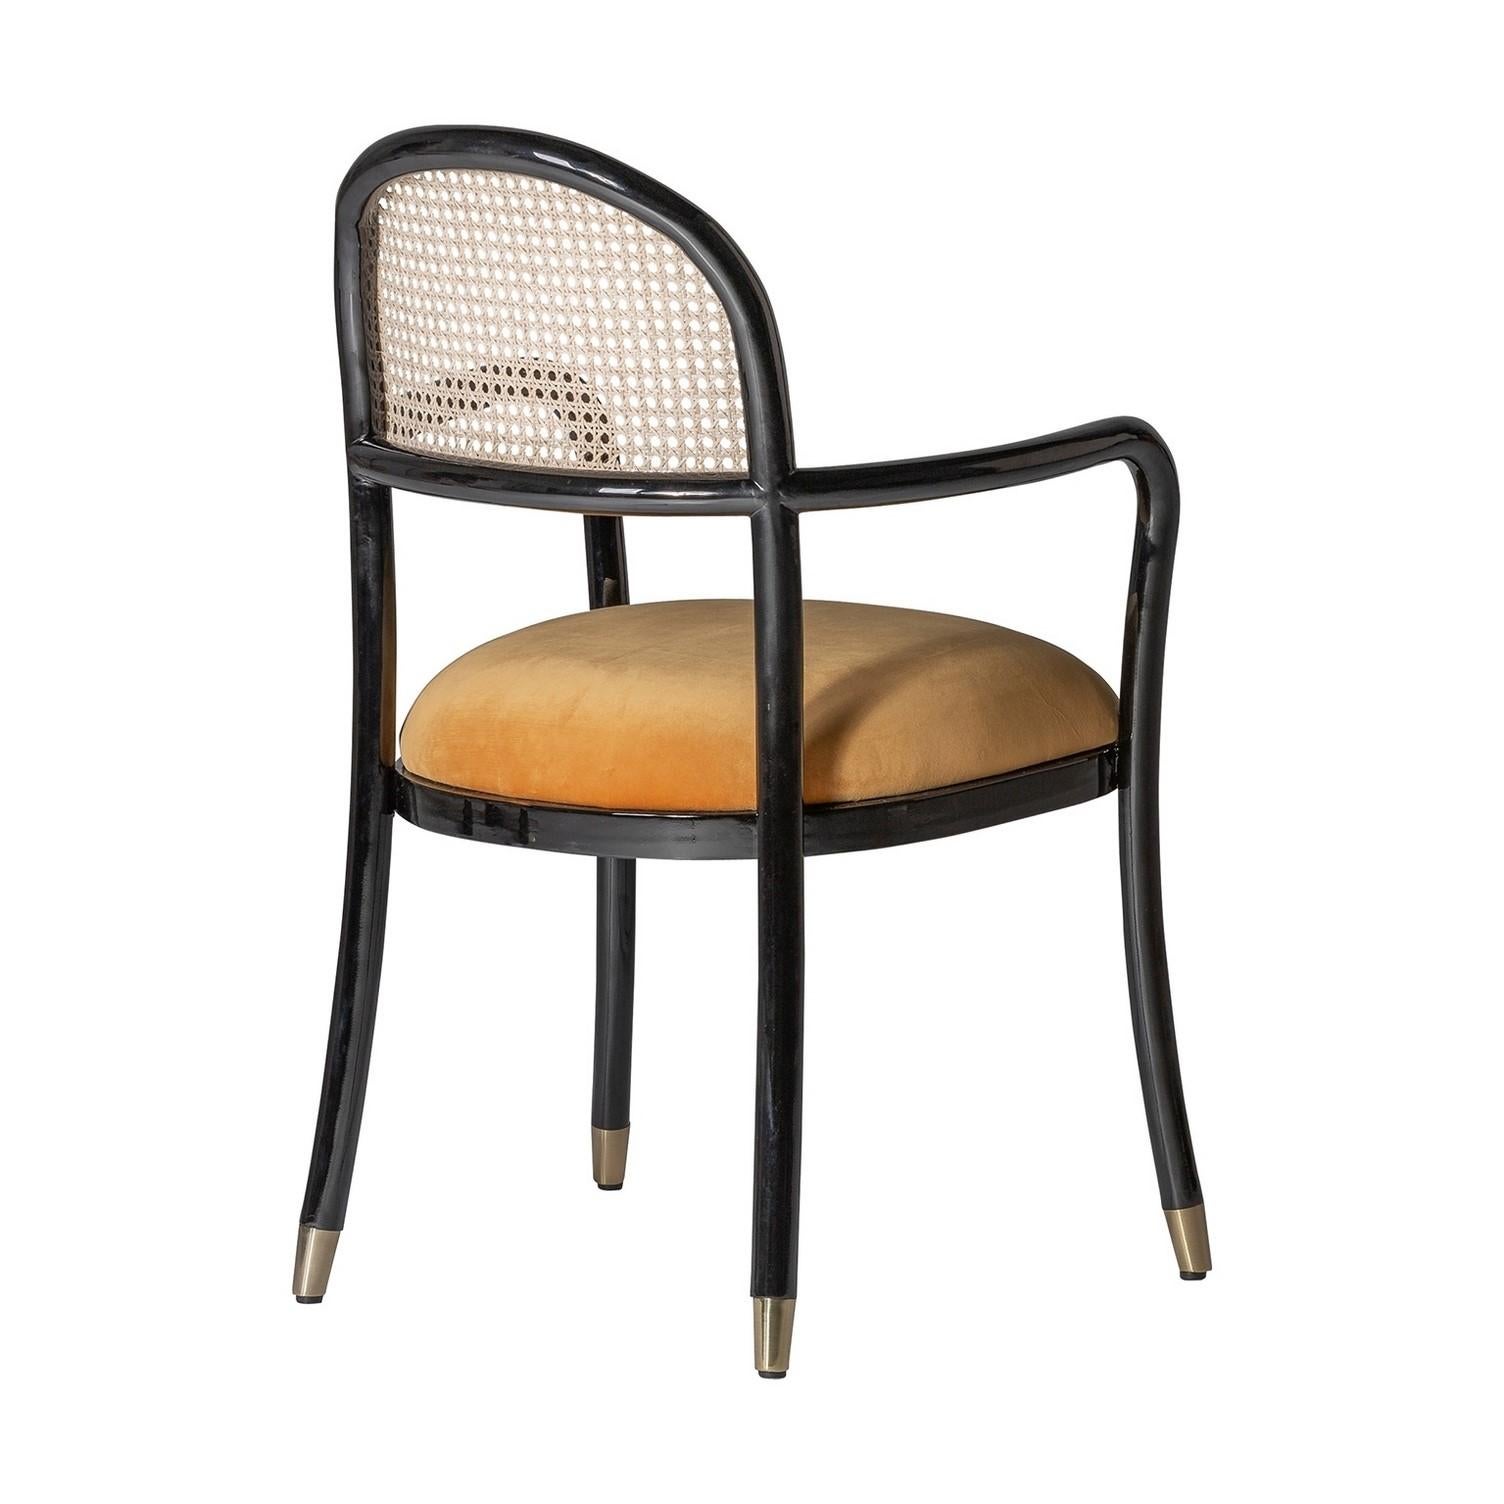 MCM Design Style black lacquered and curved wooden structure adorned with a rattan wicker cane back and velvet seat with gilded metal finish. Around the dining table, it will be perfect around your desk too!